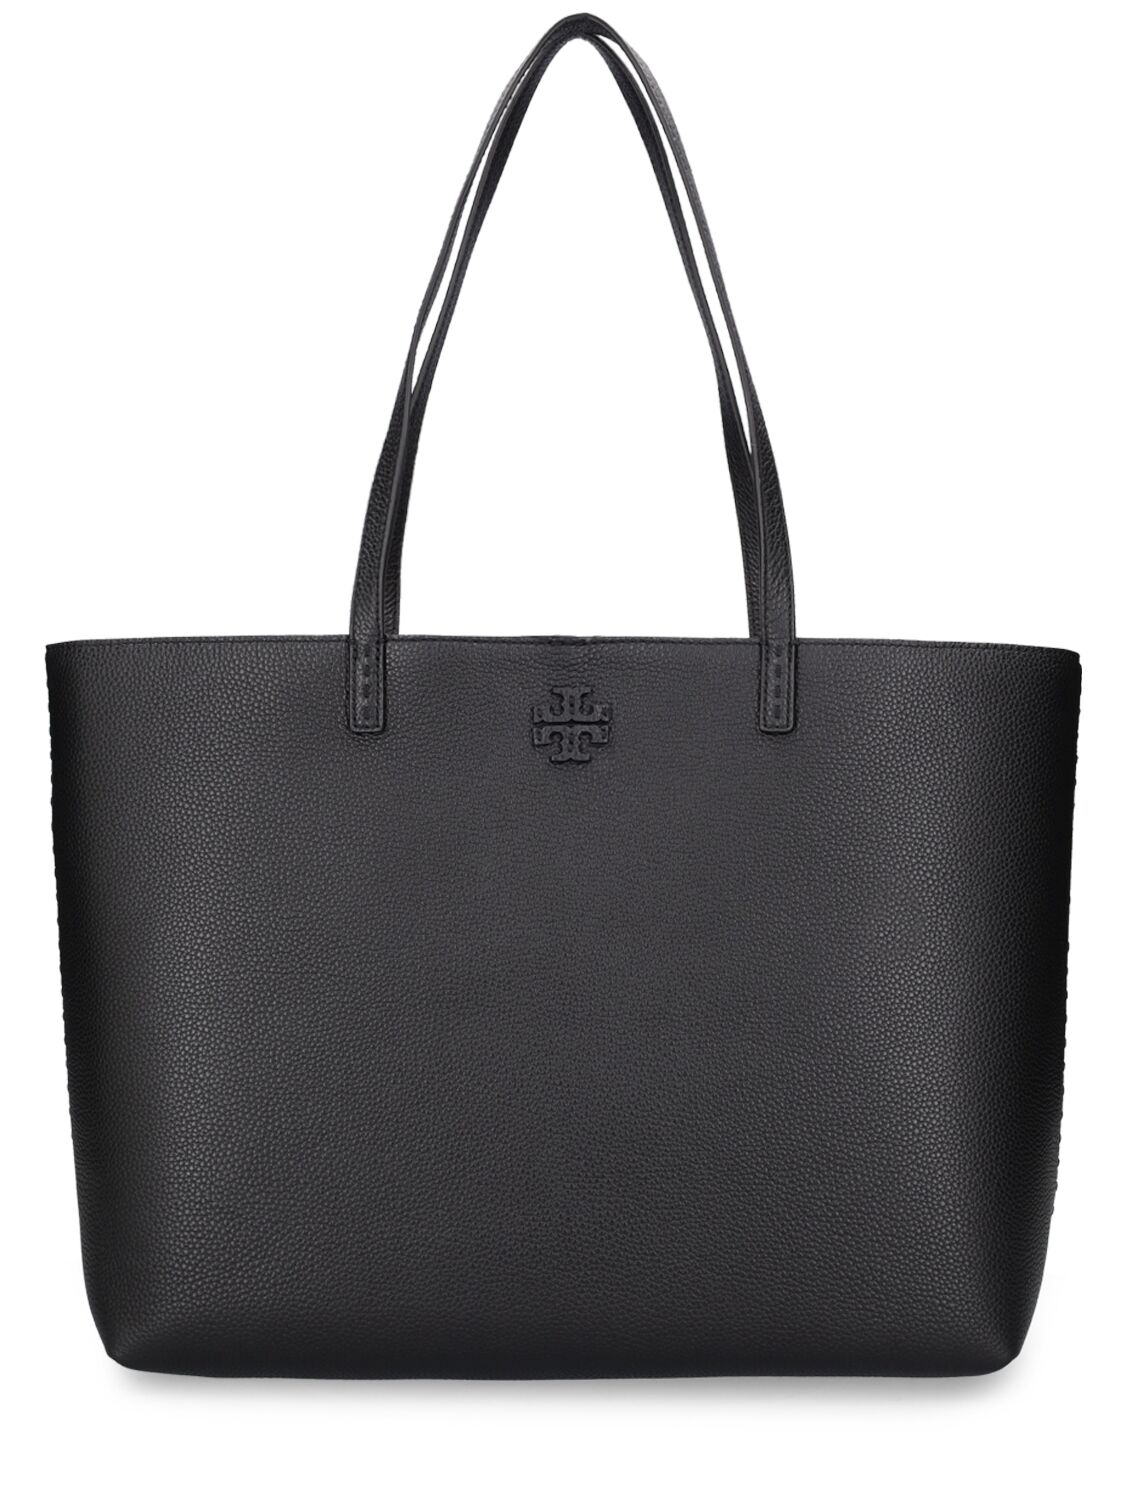 Tory Burch Mcgraw Leather Tote Bag In Black